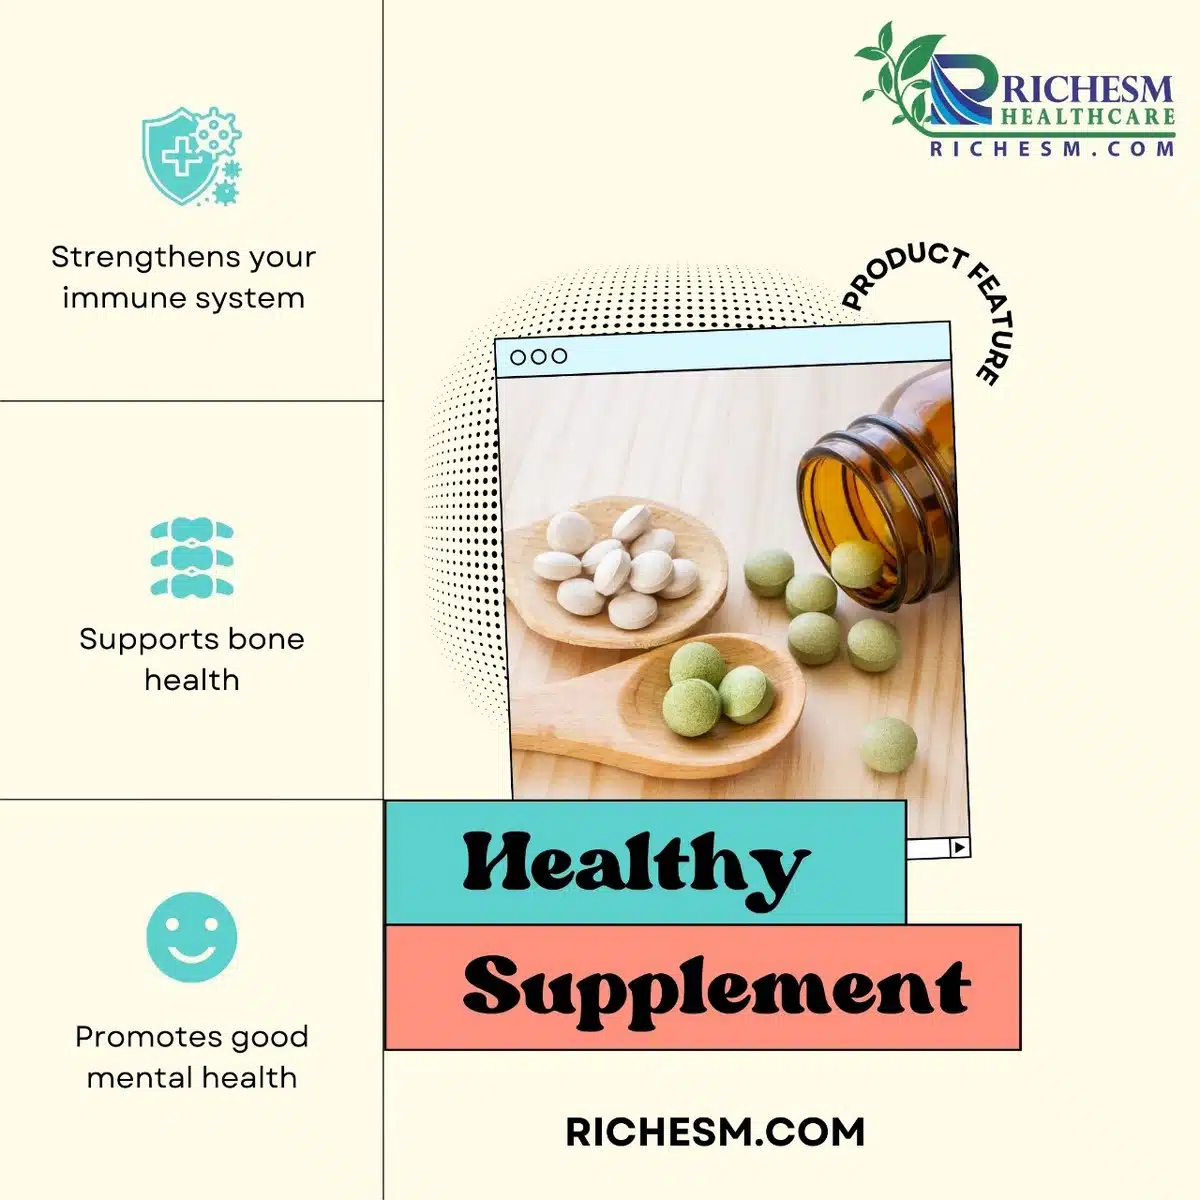 Consume A Healthy Nutrition With Richesm Products